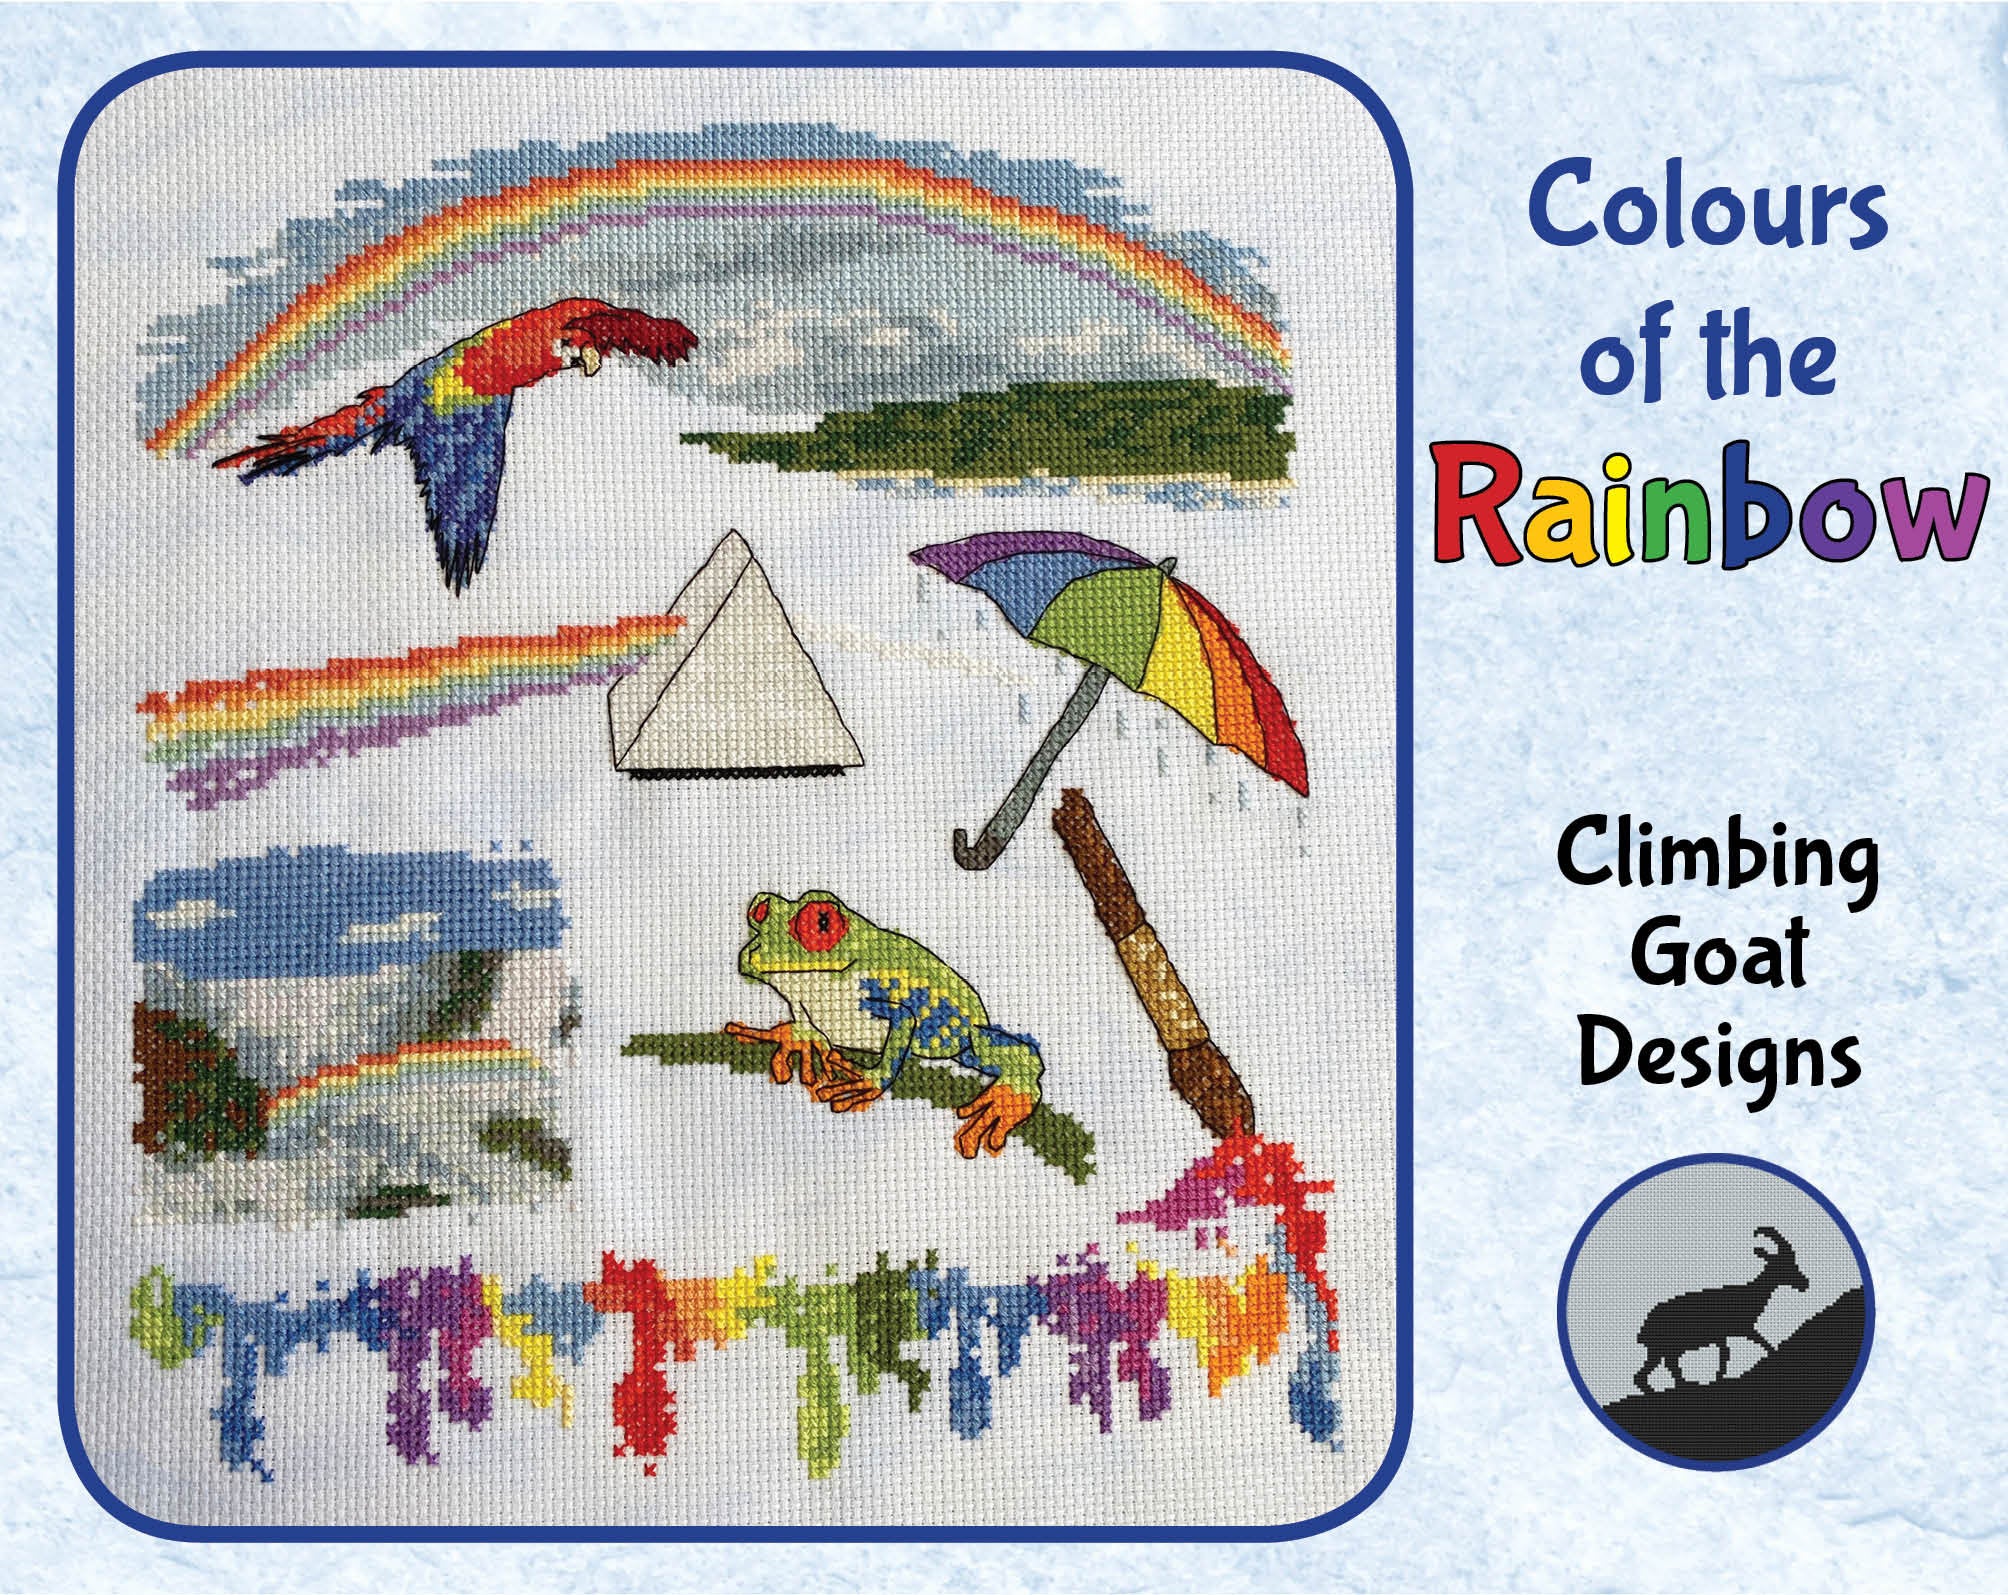 Colours of the Rainbow cross stitch pattern - rainbow, parrot, prism, umbrella, waterfall, frog and paints and paintbrush.